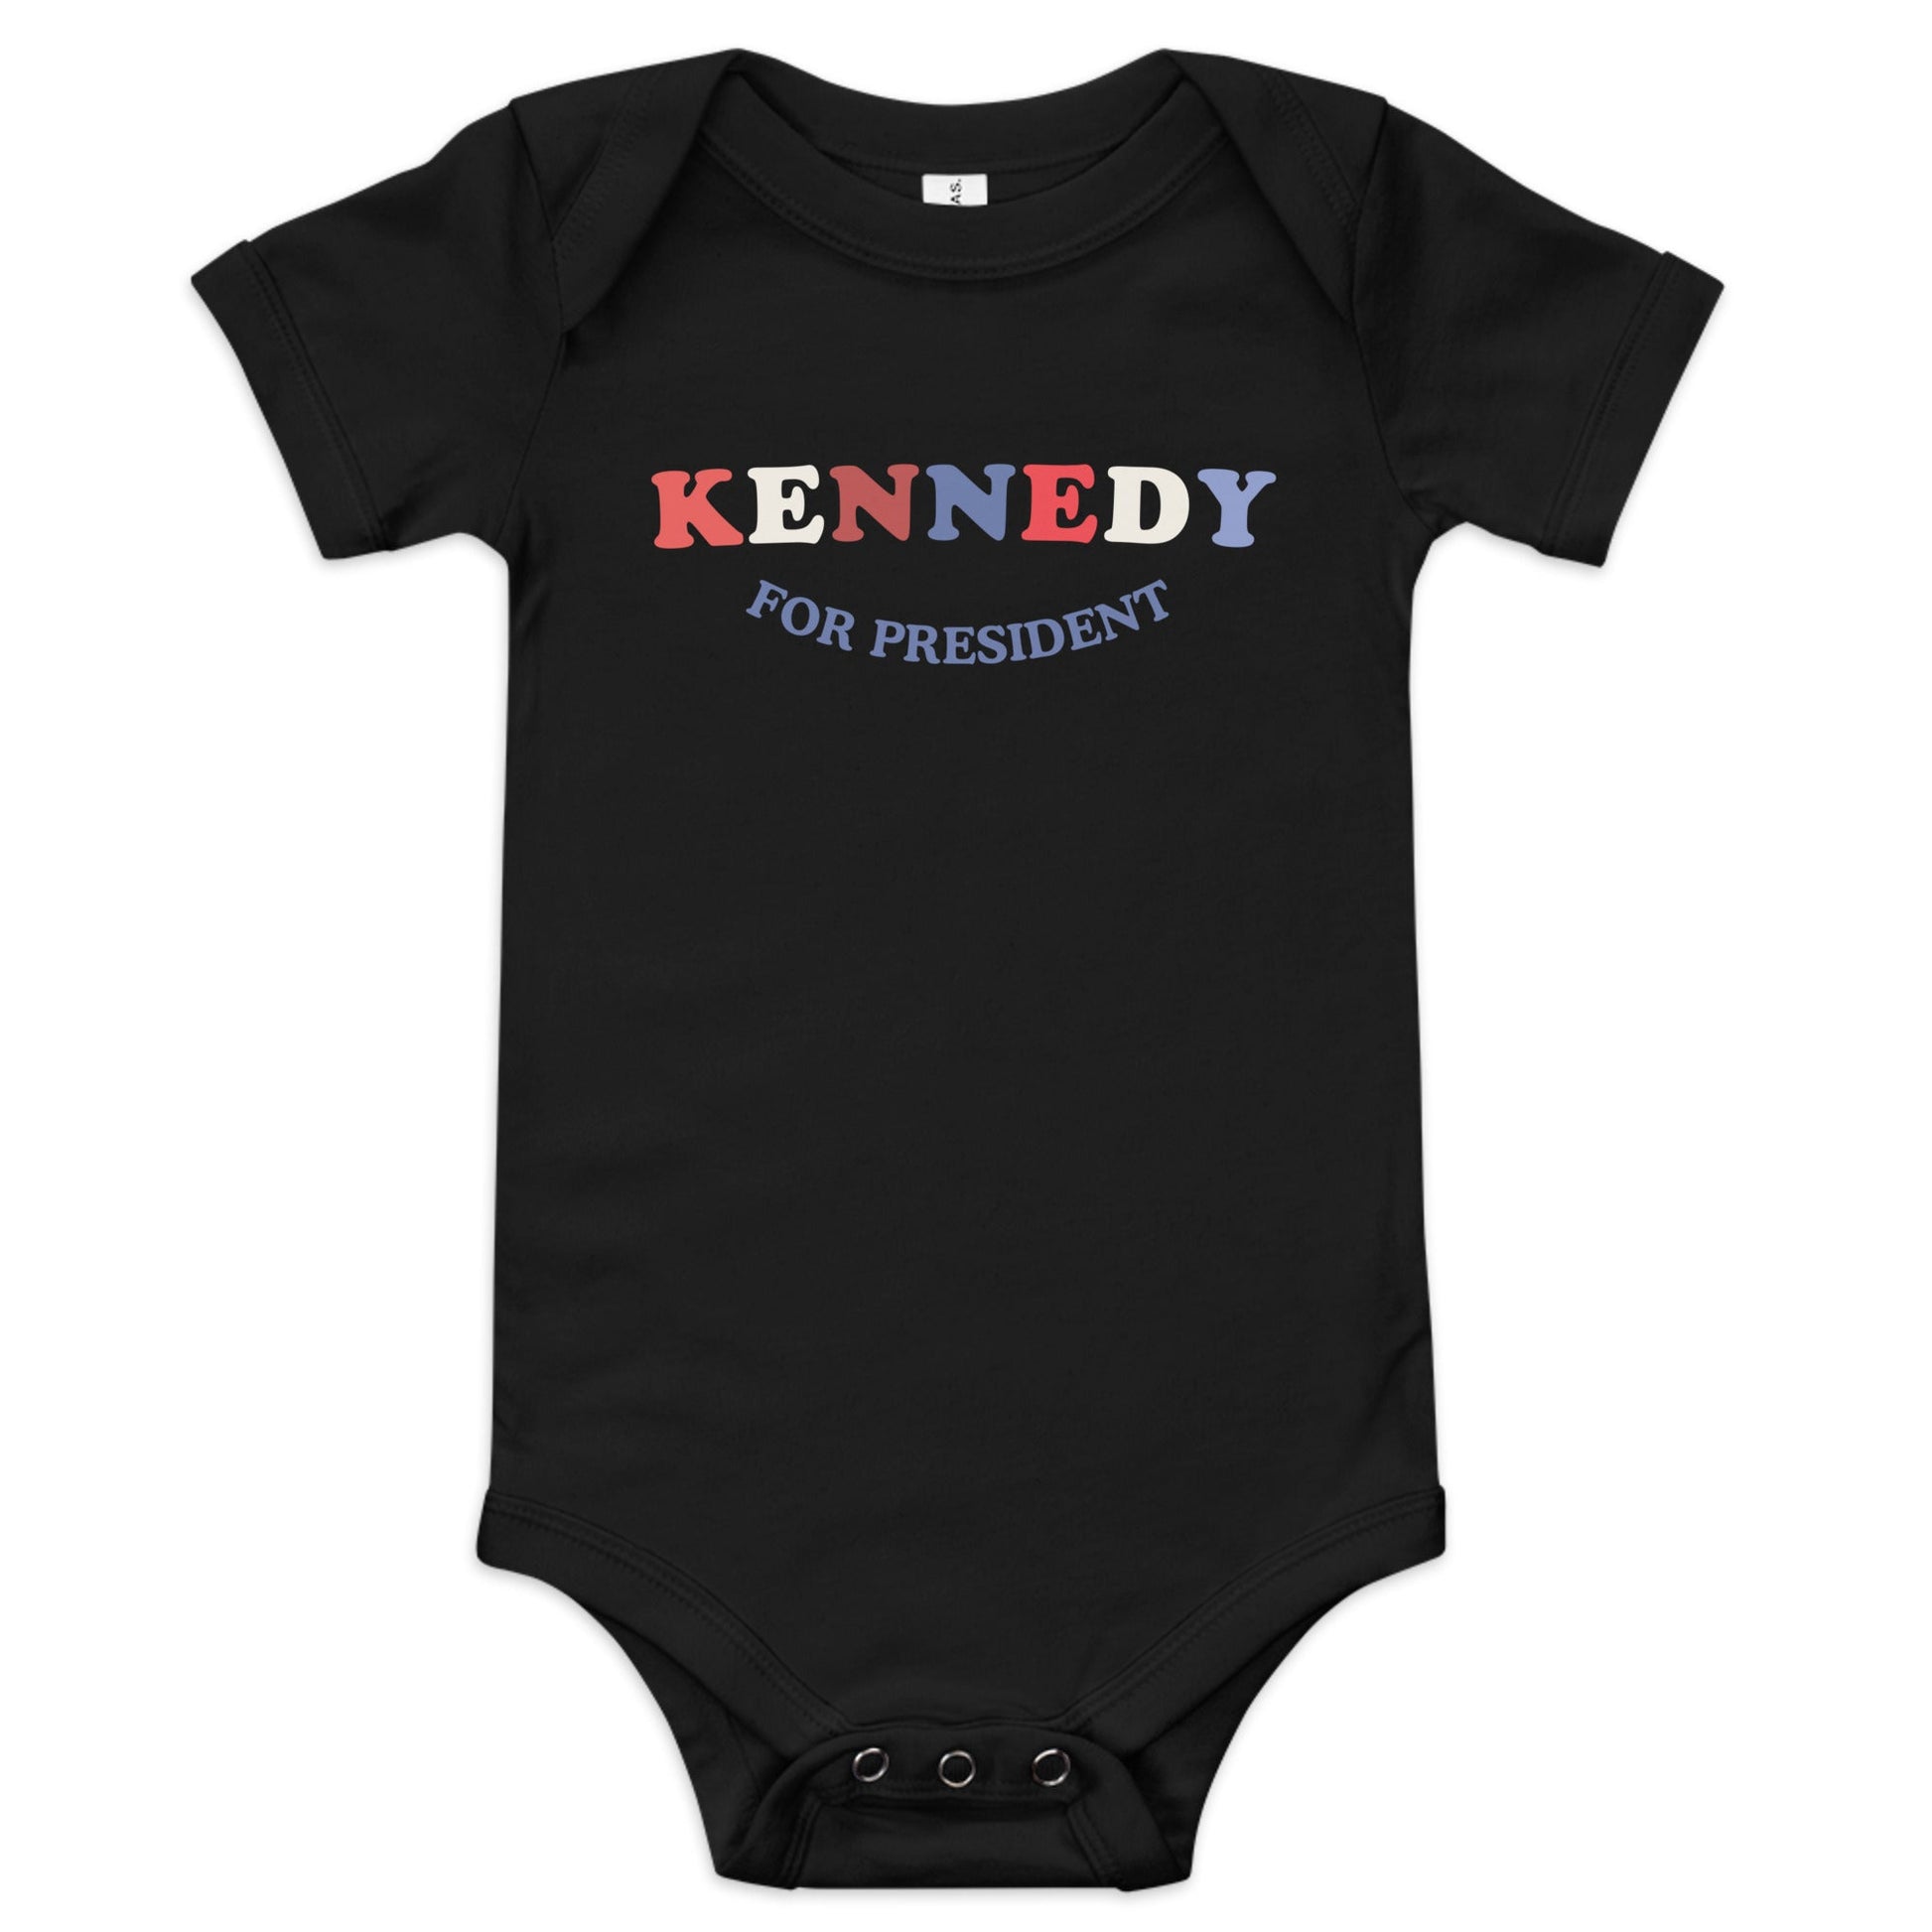 Kennedy for President Baby Onesie - TEAM KENNEDY. All rights reserved